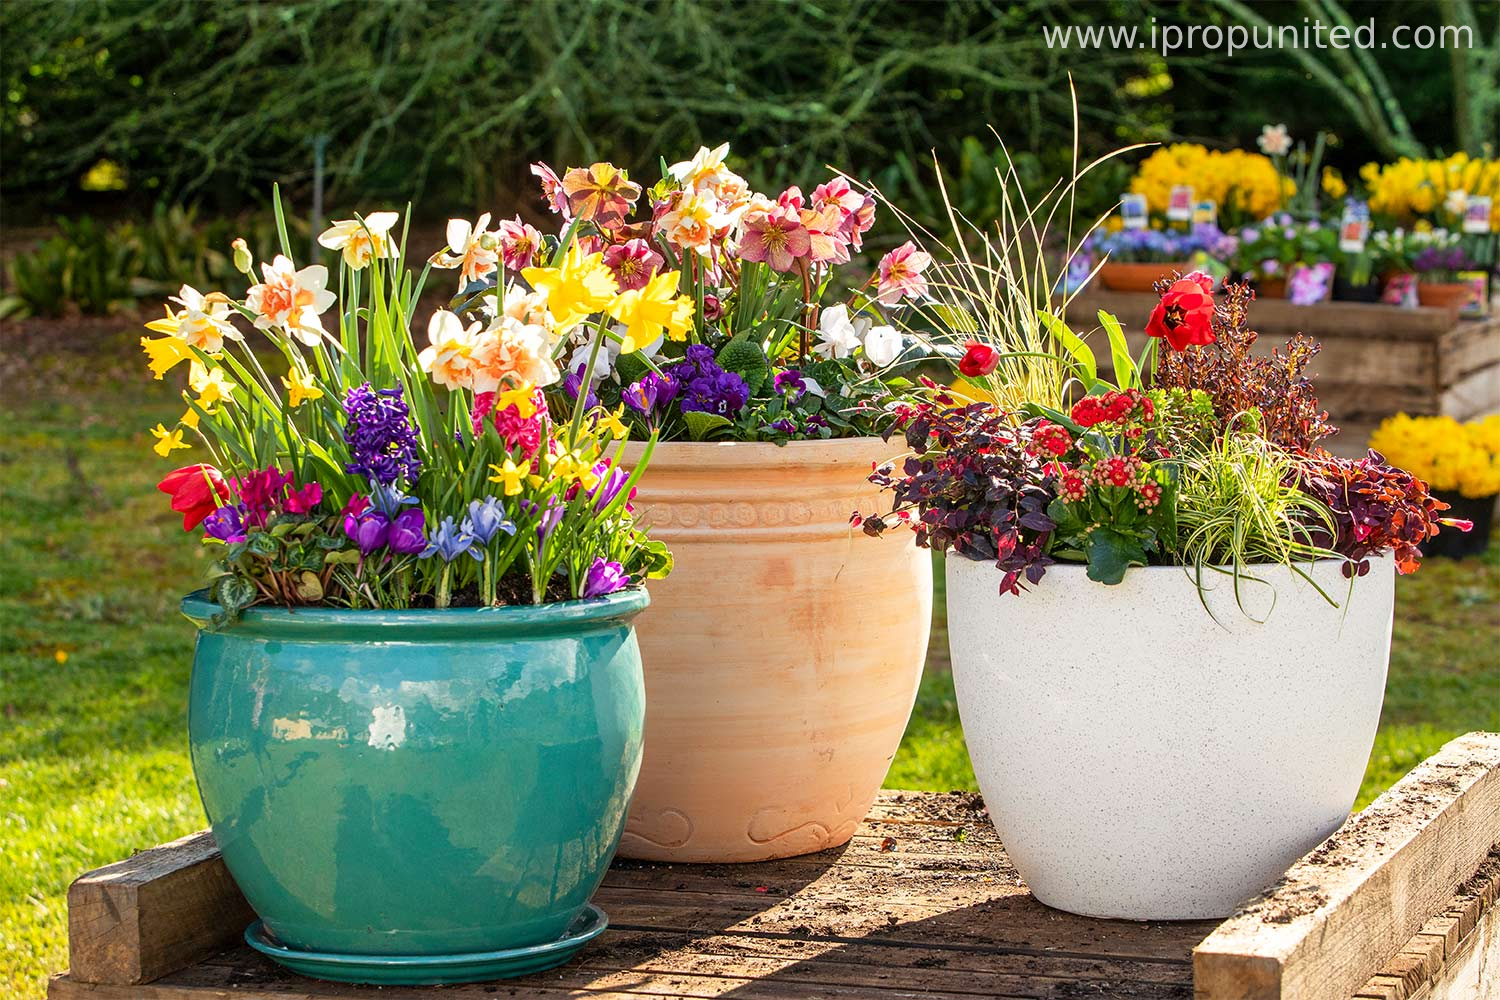 Design your own flower plots with these 5 Creative plot ideas